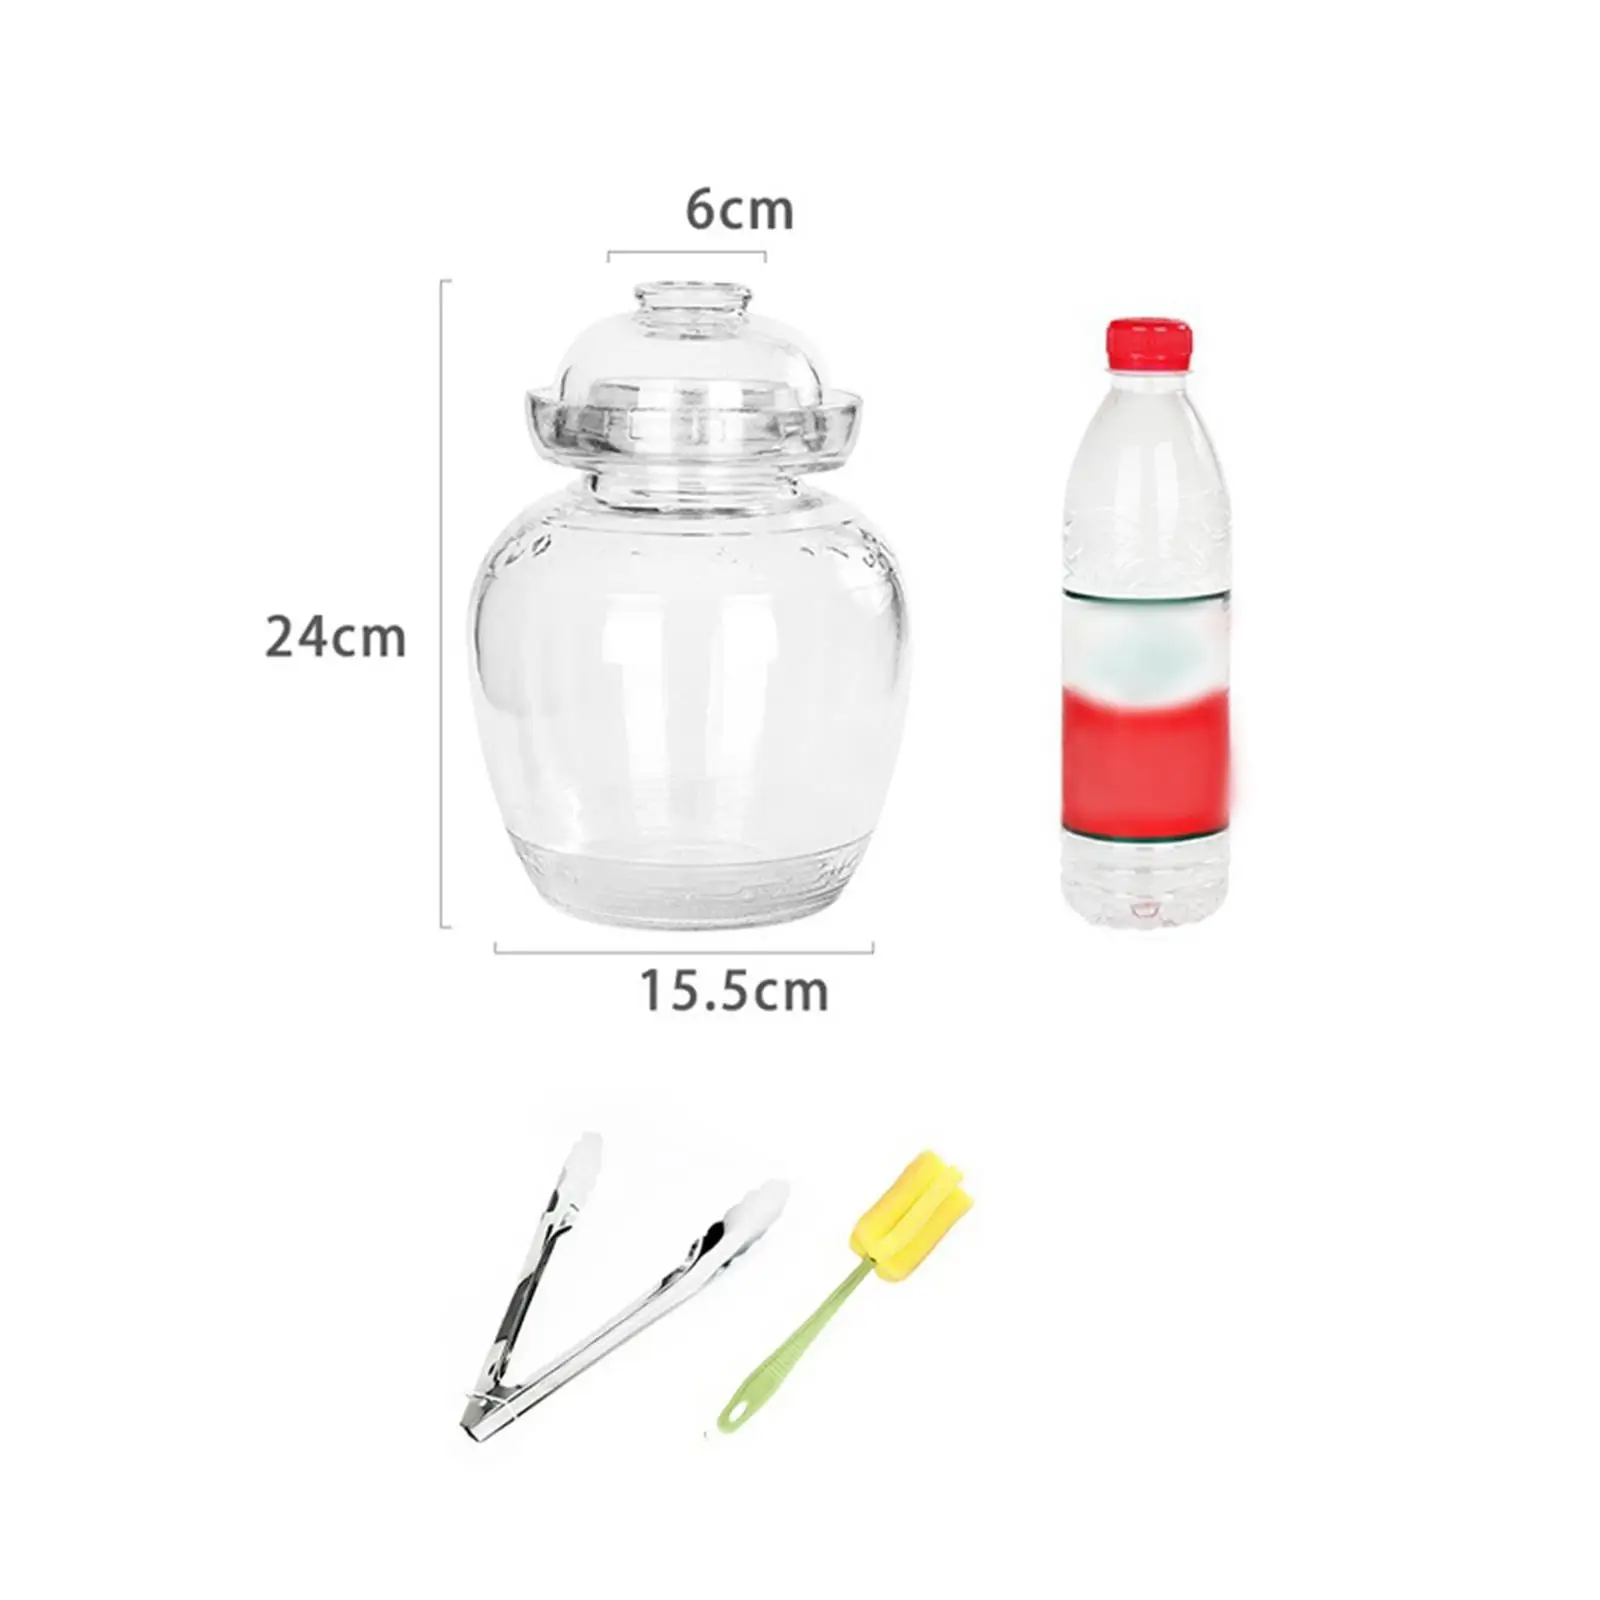 Glass Pickle Jar Durable Stable with Lid Convenient to Observe Food Containers Thick Glass Fermenting Jar for Household Cooking